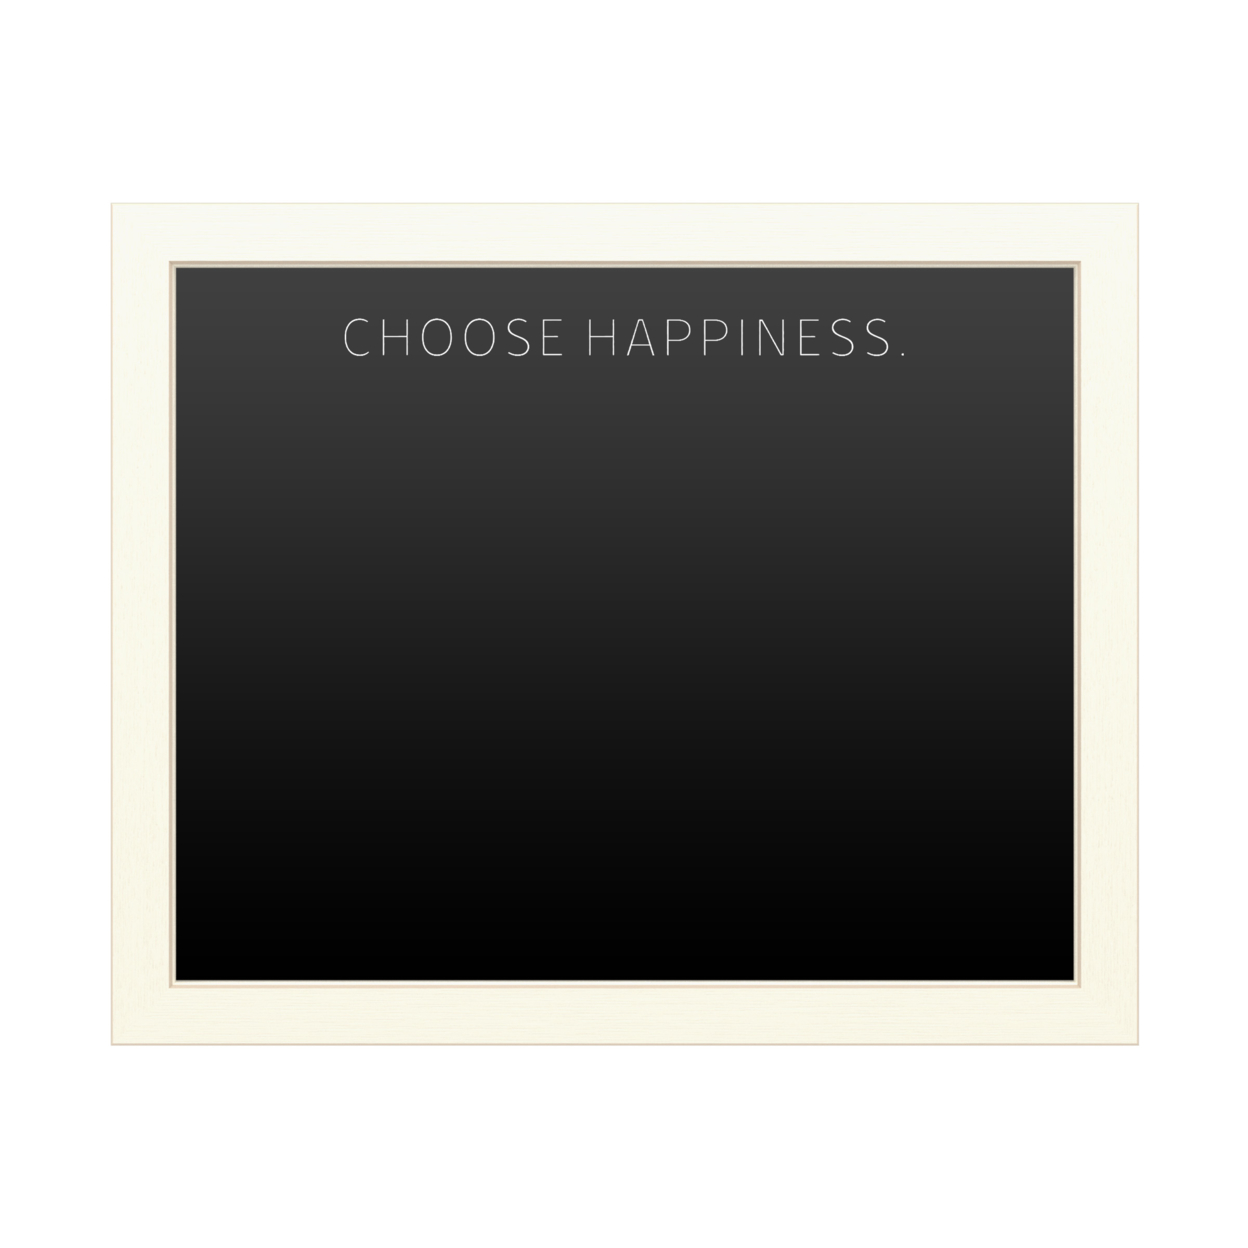 16 X 20 Chalk Board With Printed Artwork - Choose Happiness White Board - Ready To Hang Chalkboard